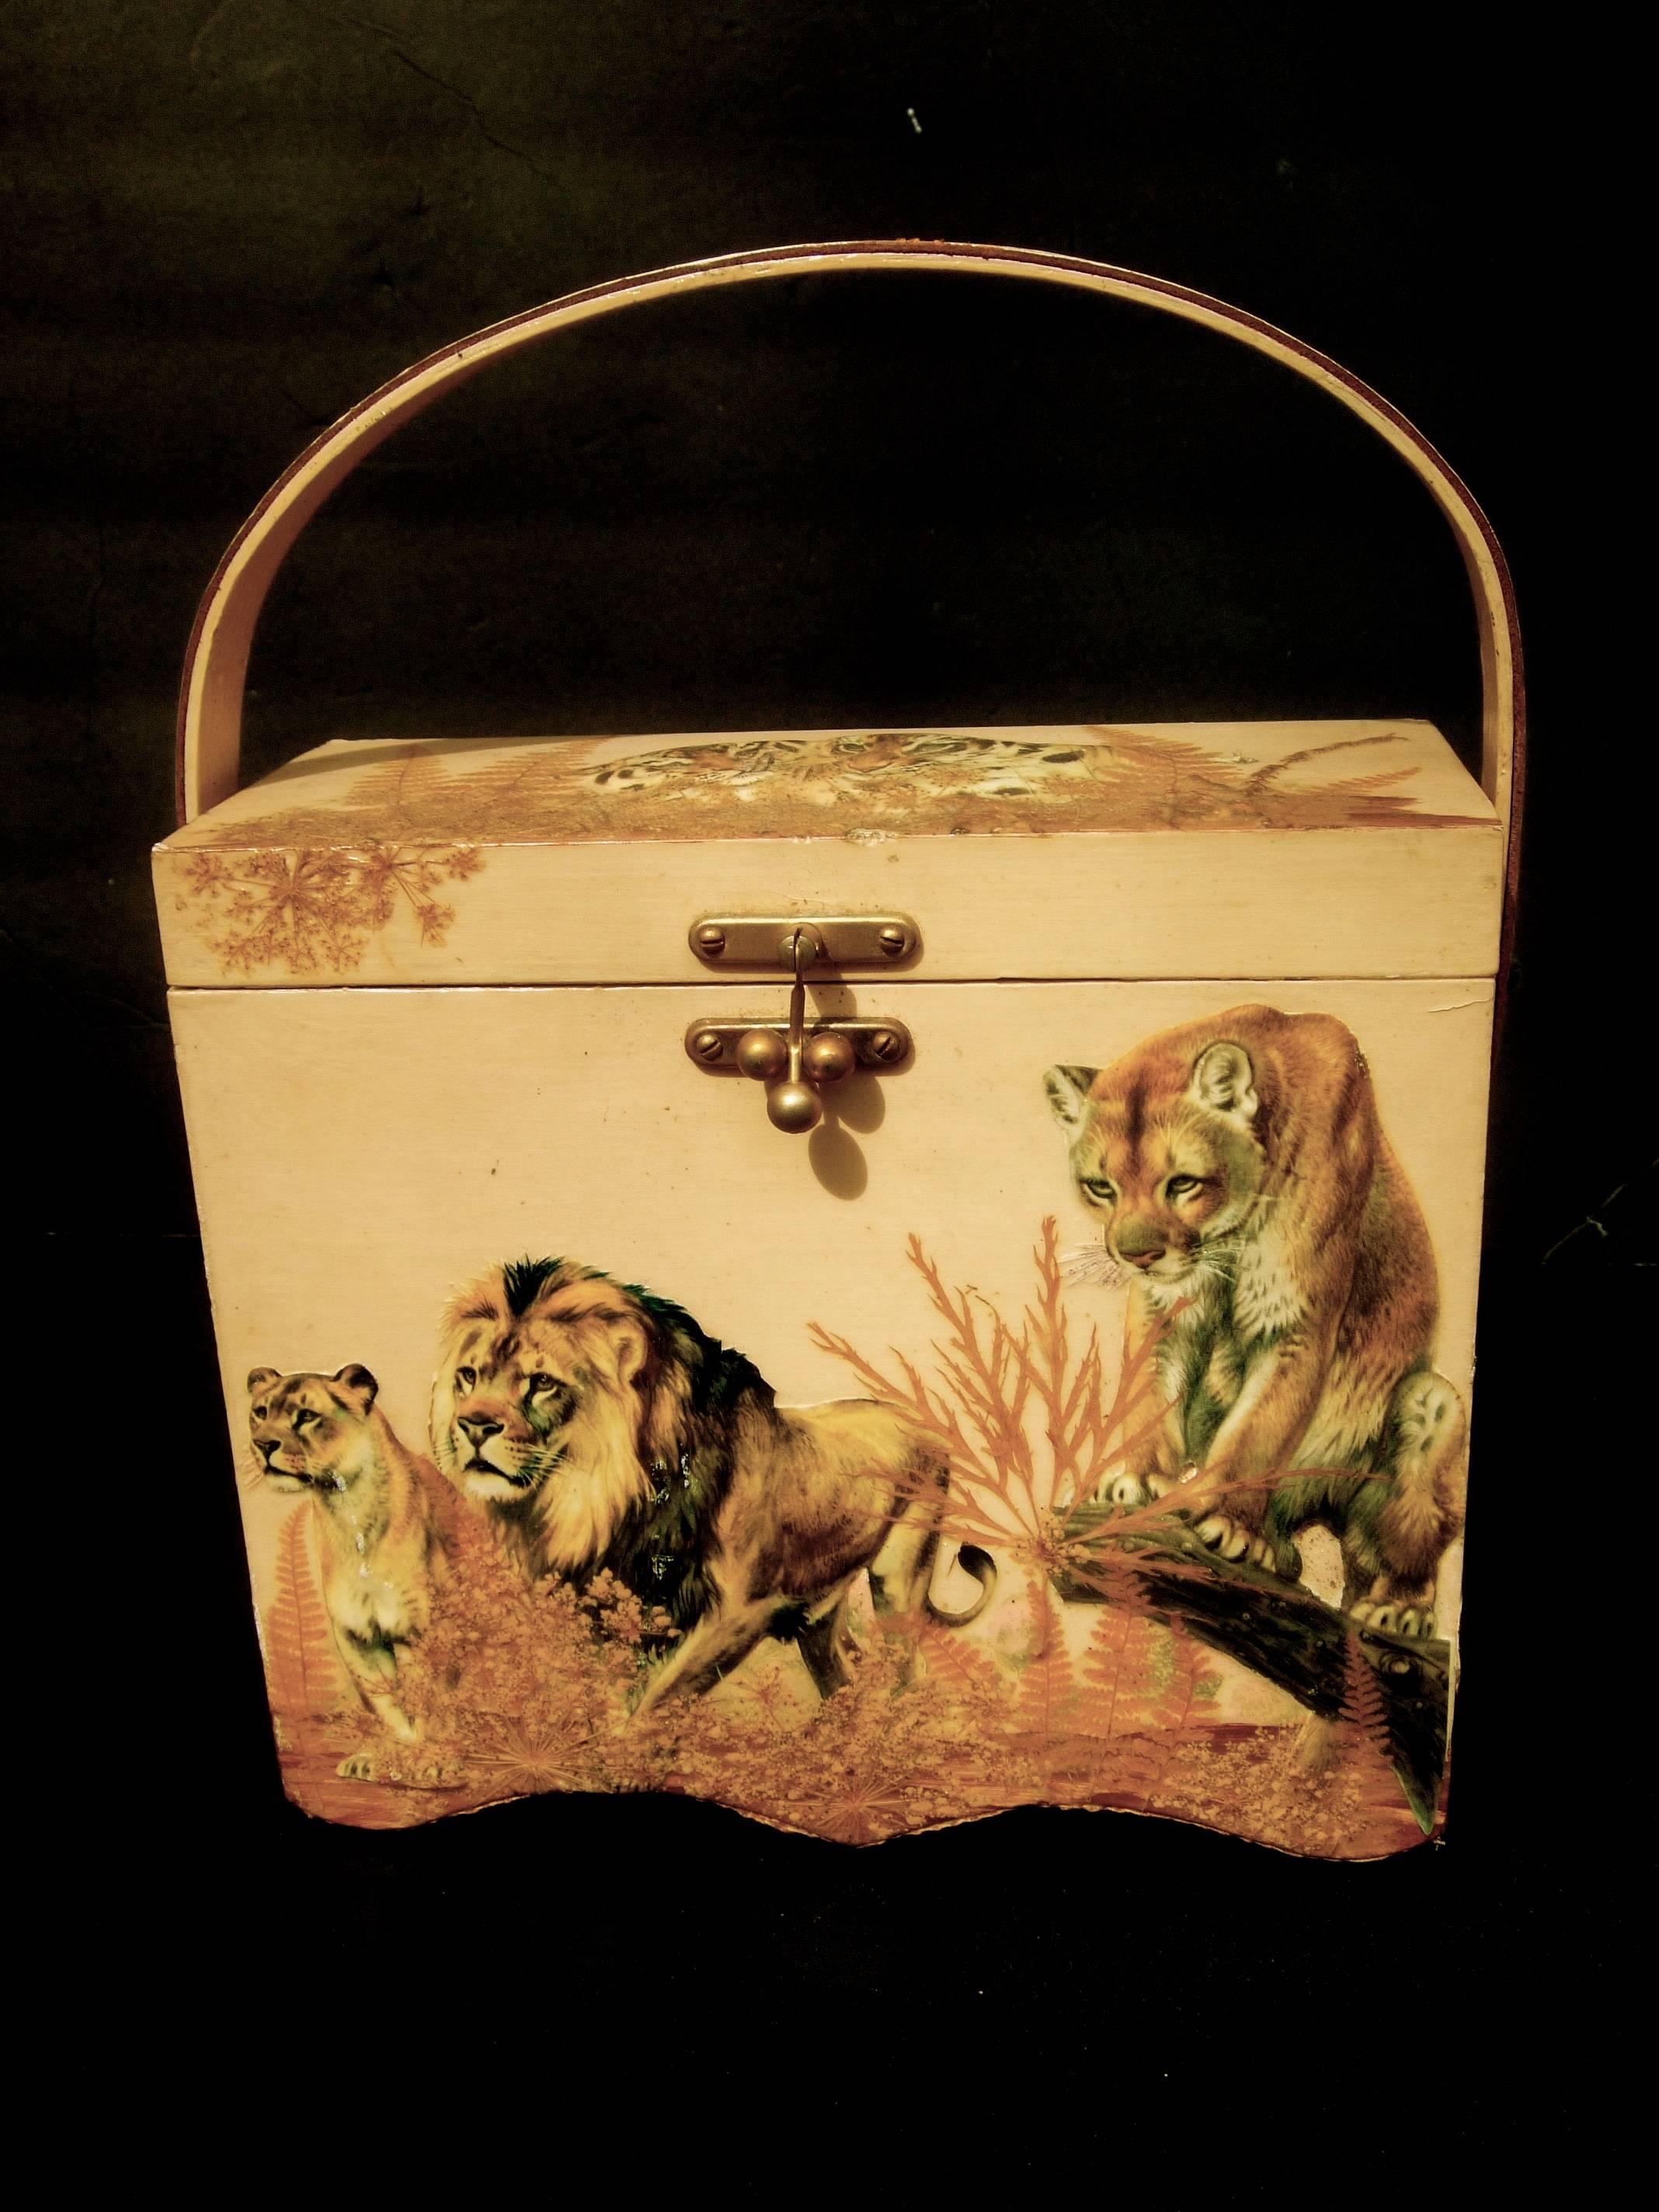 Exotic jungle safari theme wood decoupage box purse c 1970s
The unique rectangular shaped wood box purse is decorated
with wild jungle animals in three dimensional decoupage

The interior is lined with cloth animal print fabric
Carried with a swivel